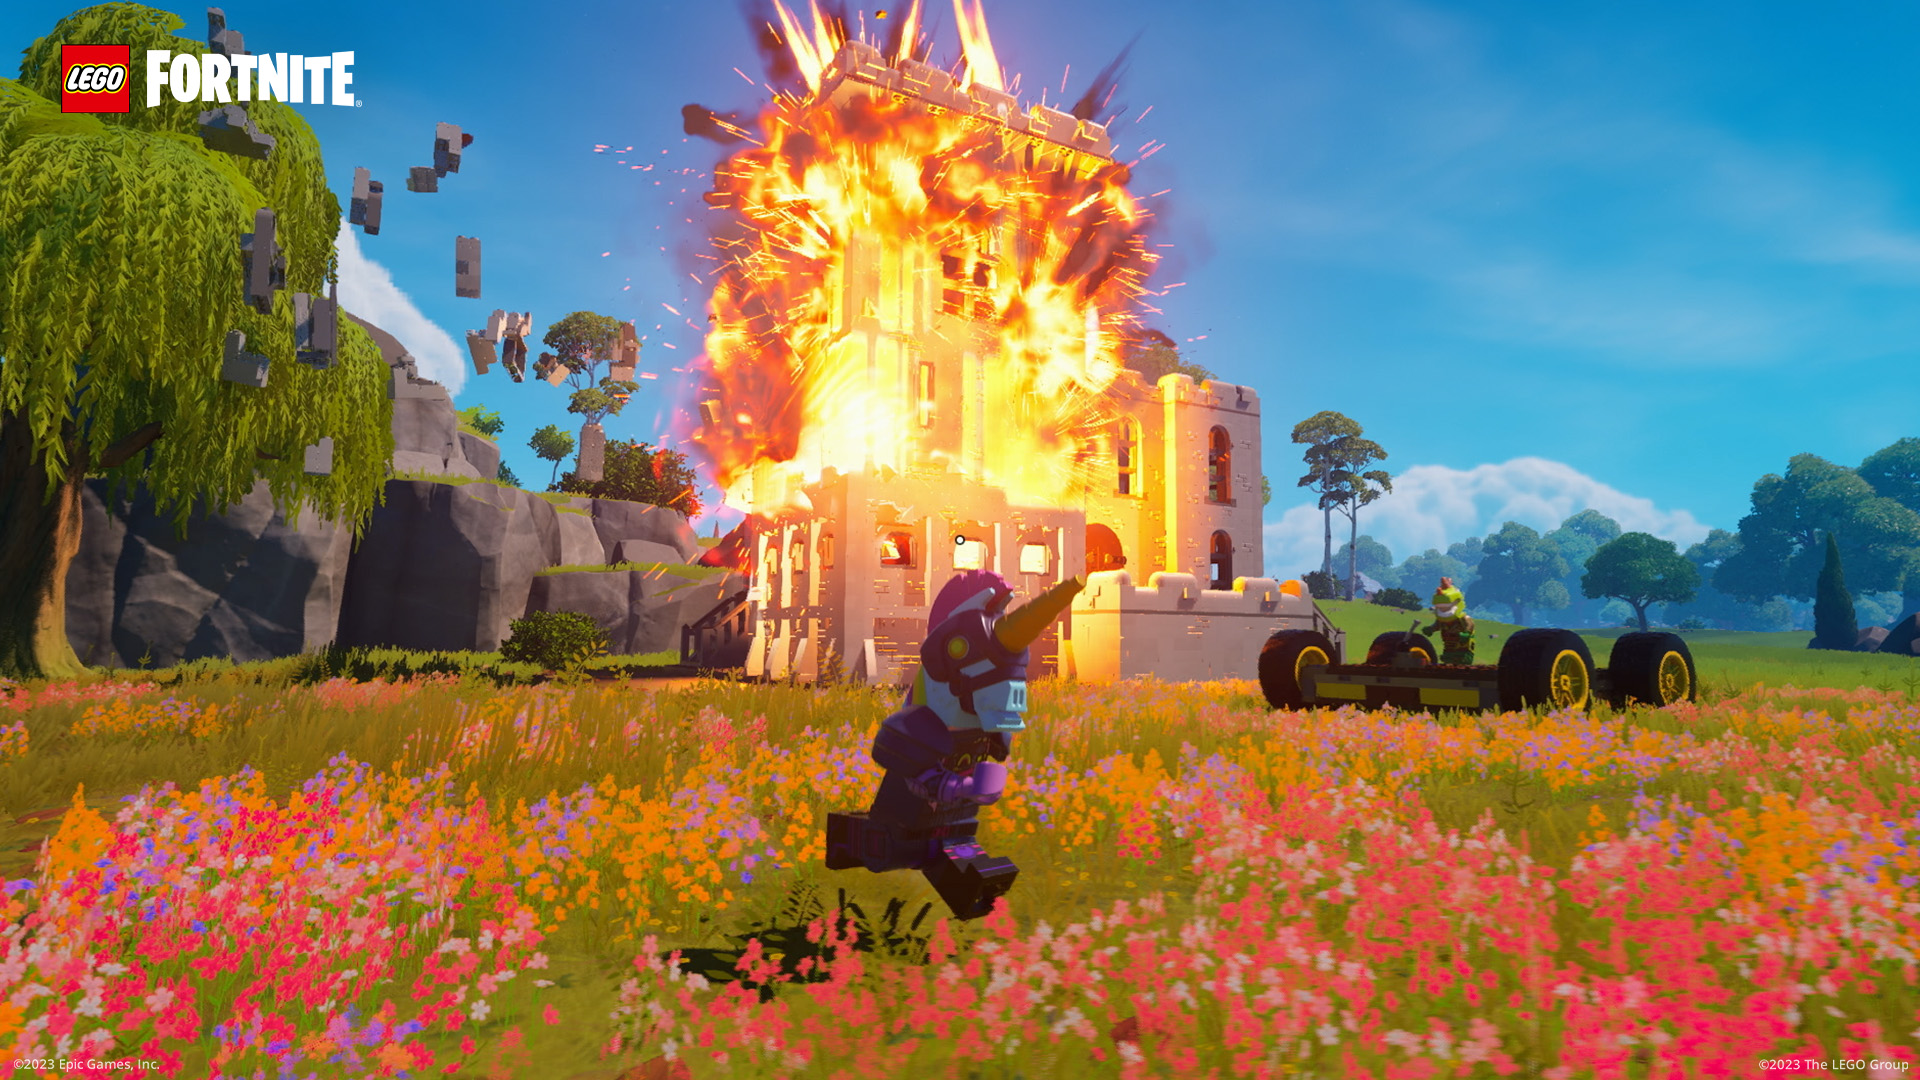 LEGO Fortnite officially launches, game mode now live